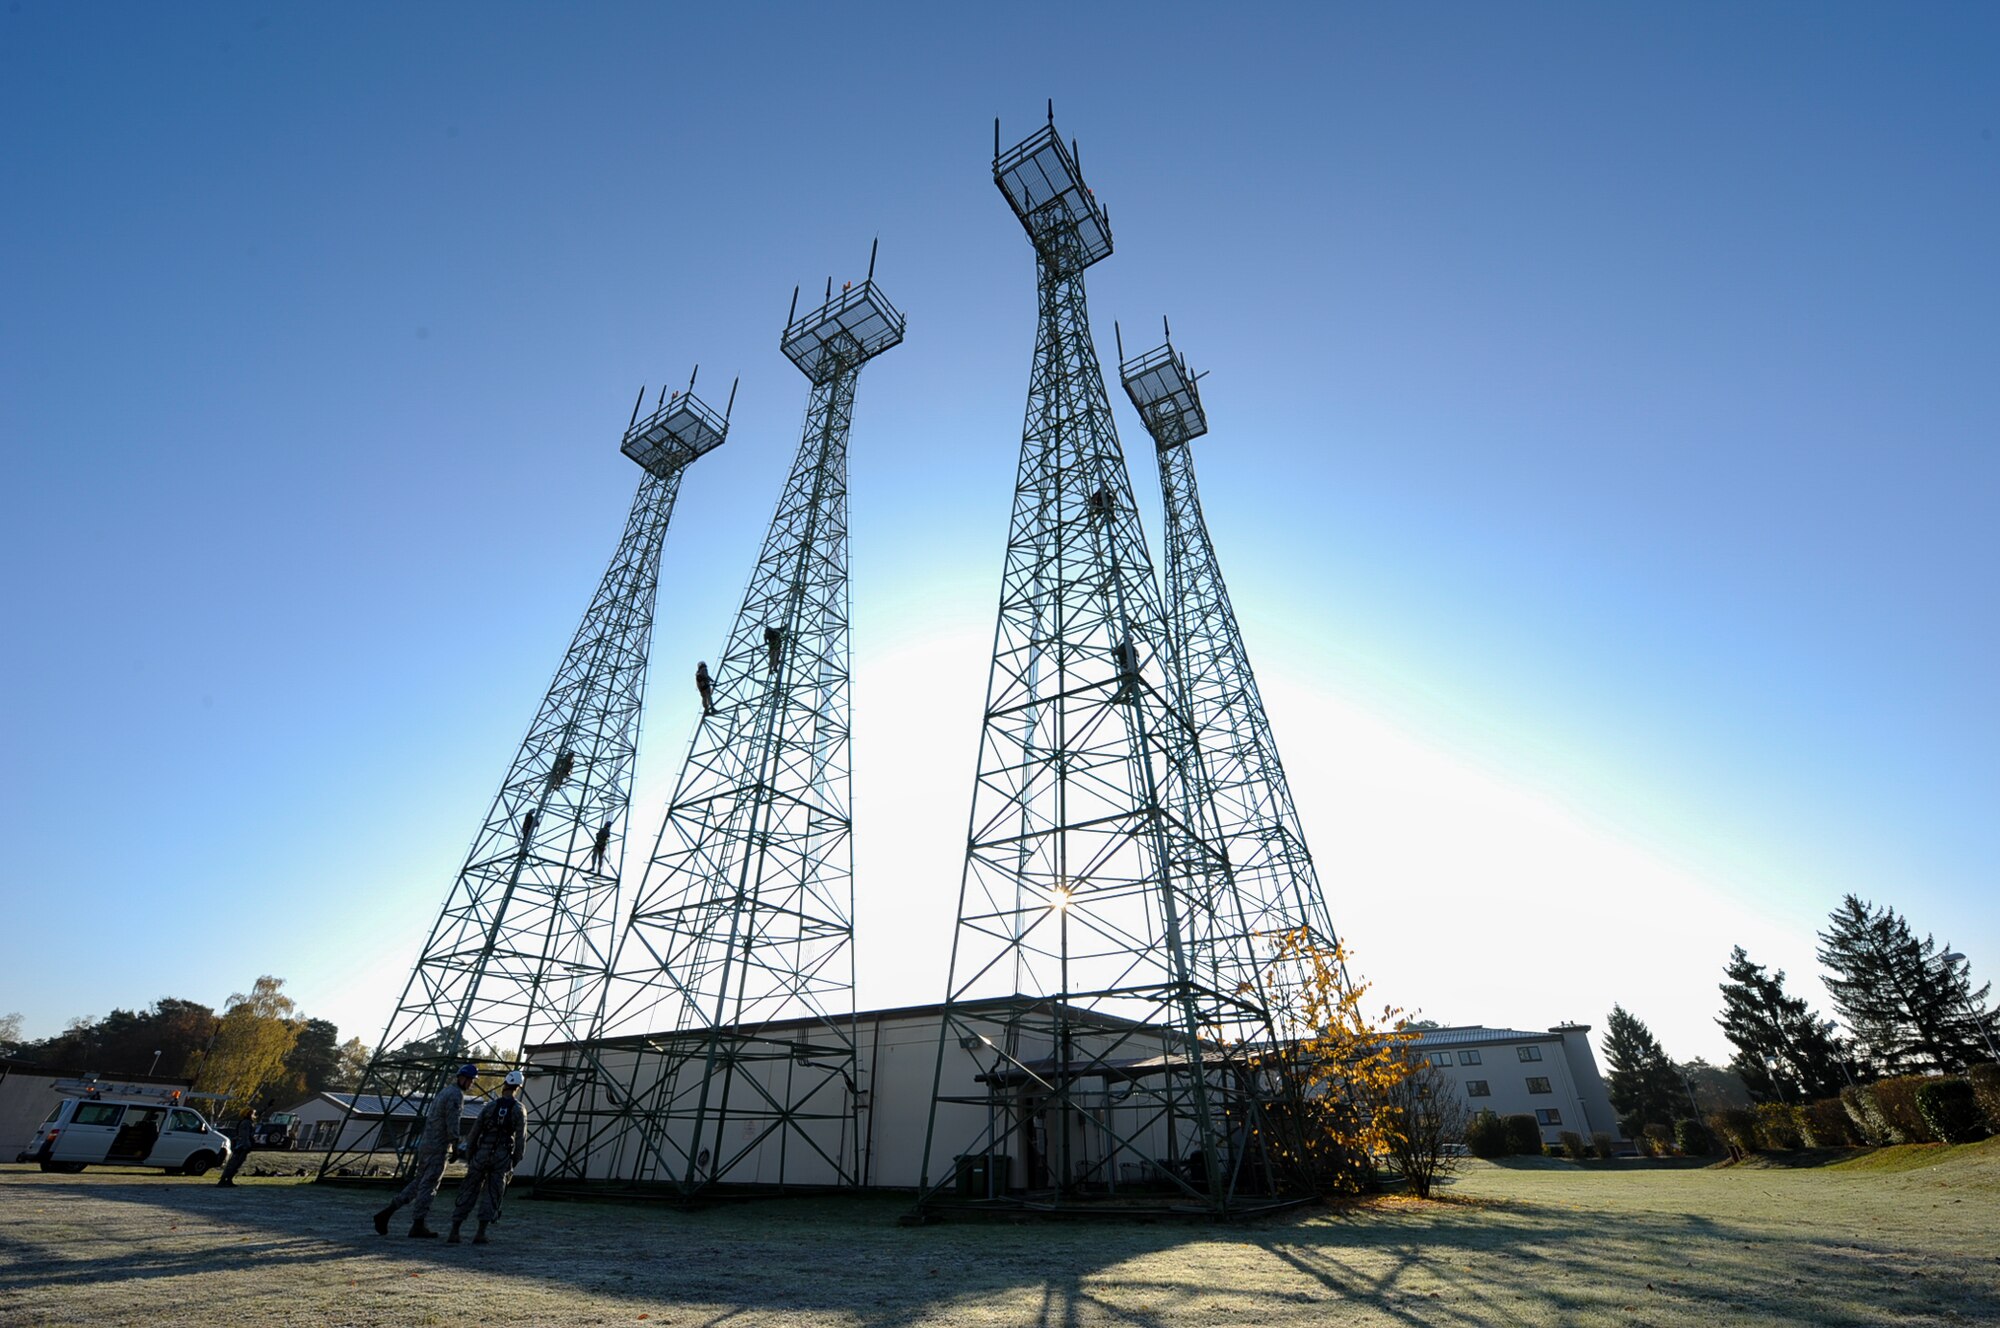 Airmen from the 86th Operations Support Squadron climb air traffic control radio antennas at Ramstein Air Base, Germany, Nov. 14, 2016. The Air Traffic Control and Landing Systems flight regularly checks all Instrument Landing System’s parameters to ensure the antenna towers and monitors are performing correctly.(U.S. Air Force photo by Airman 1st Class Savannah L. Waters)